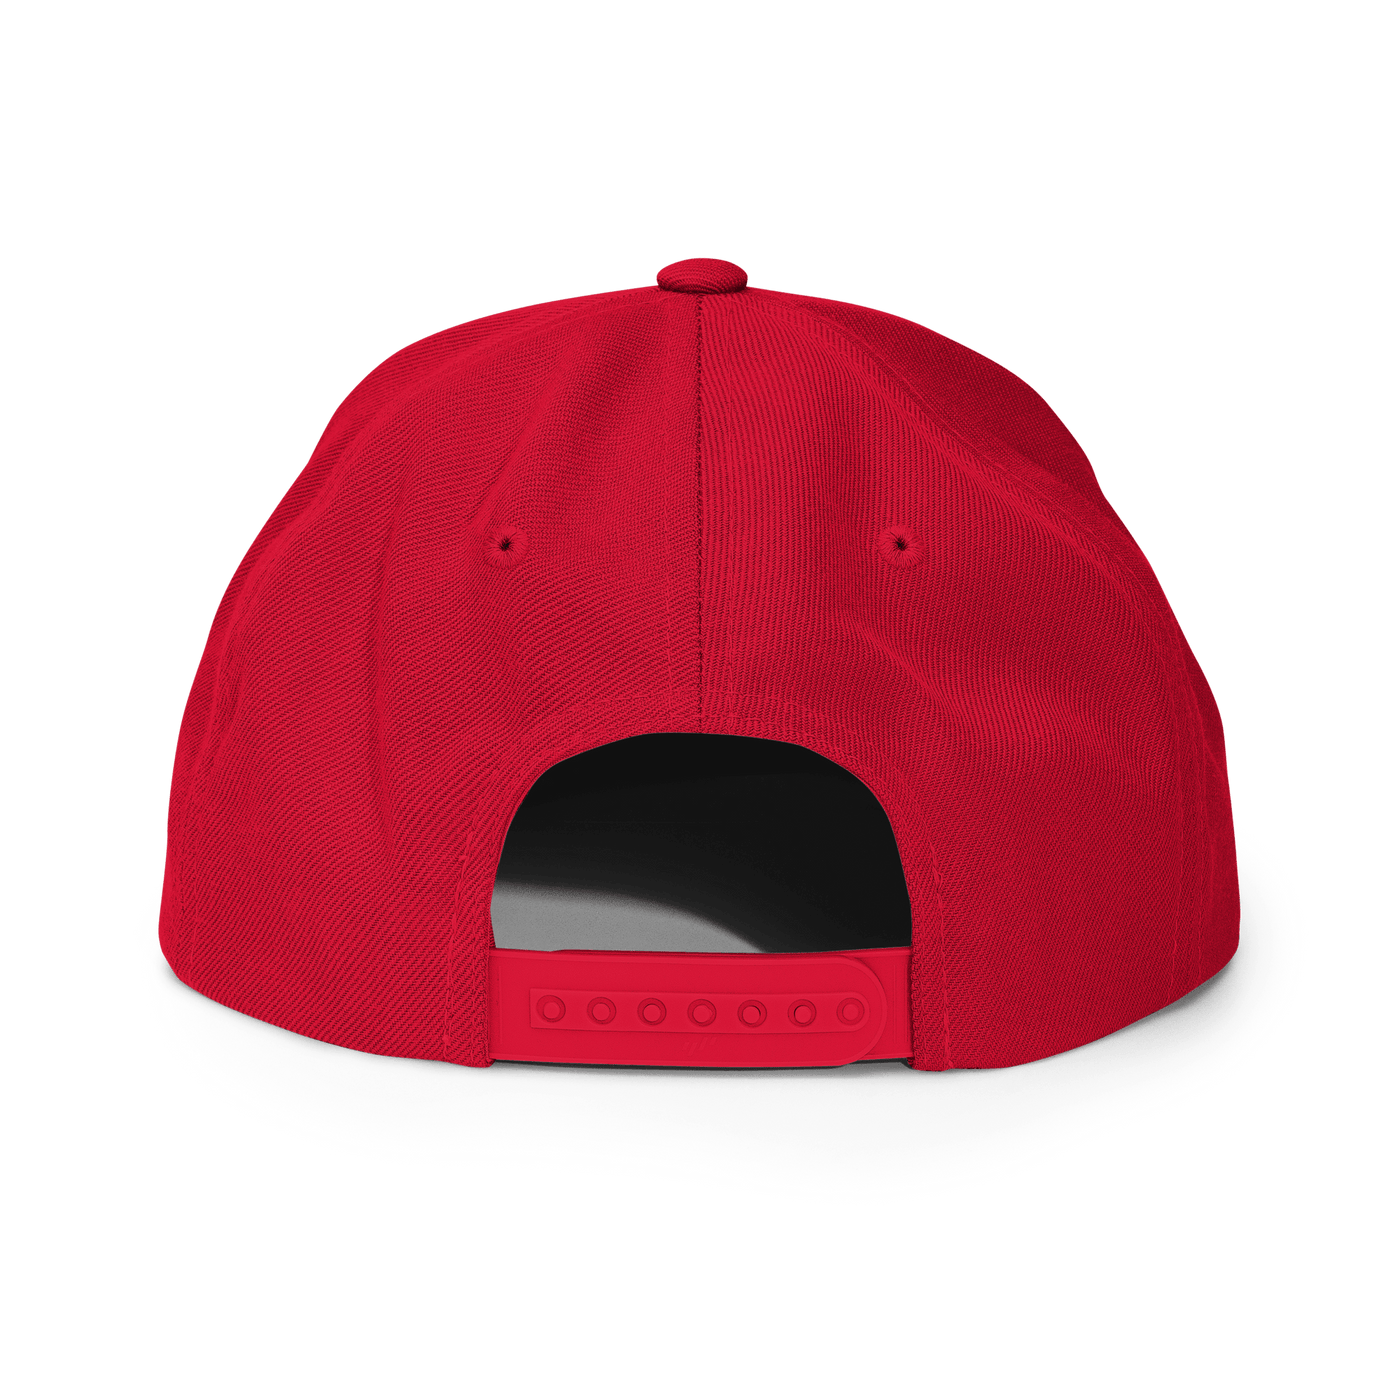 Astronaut Snapback Hat - Red - - Just Another Cap Store